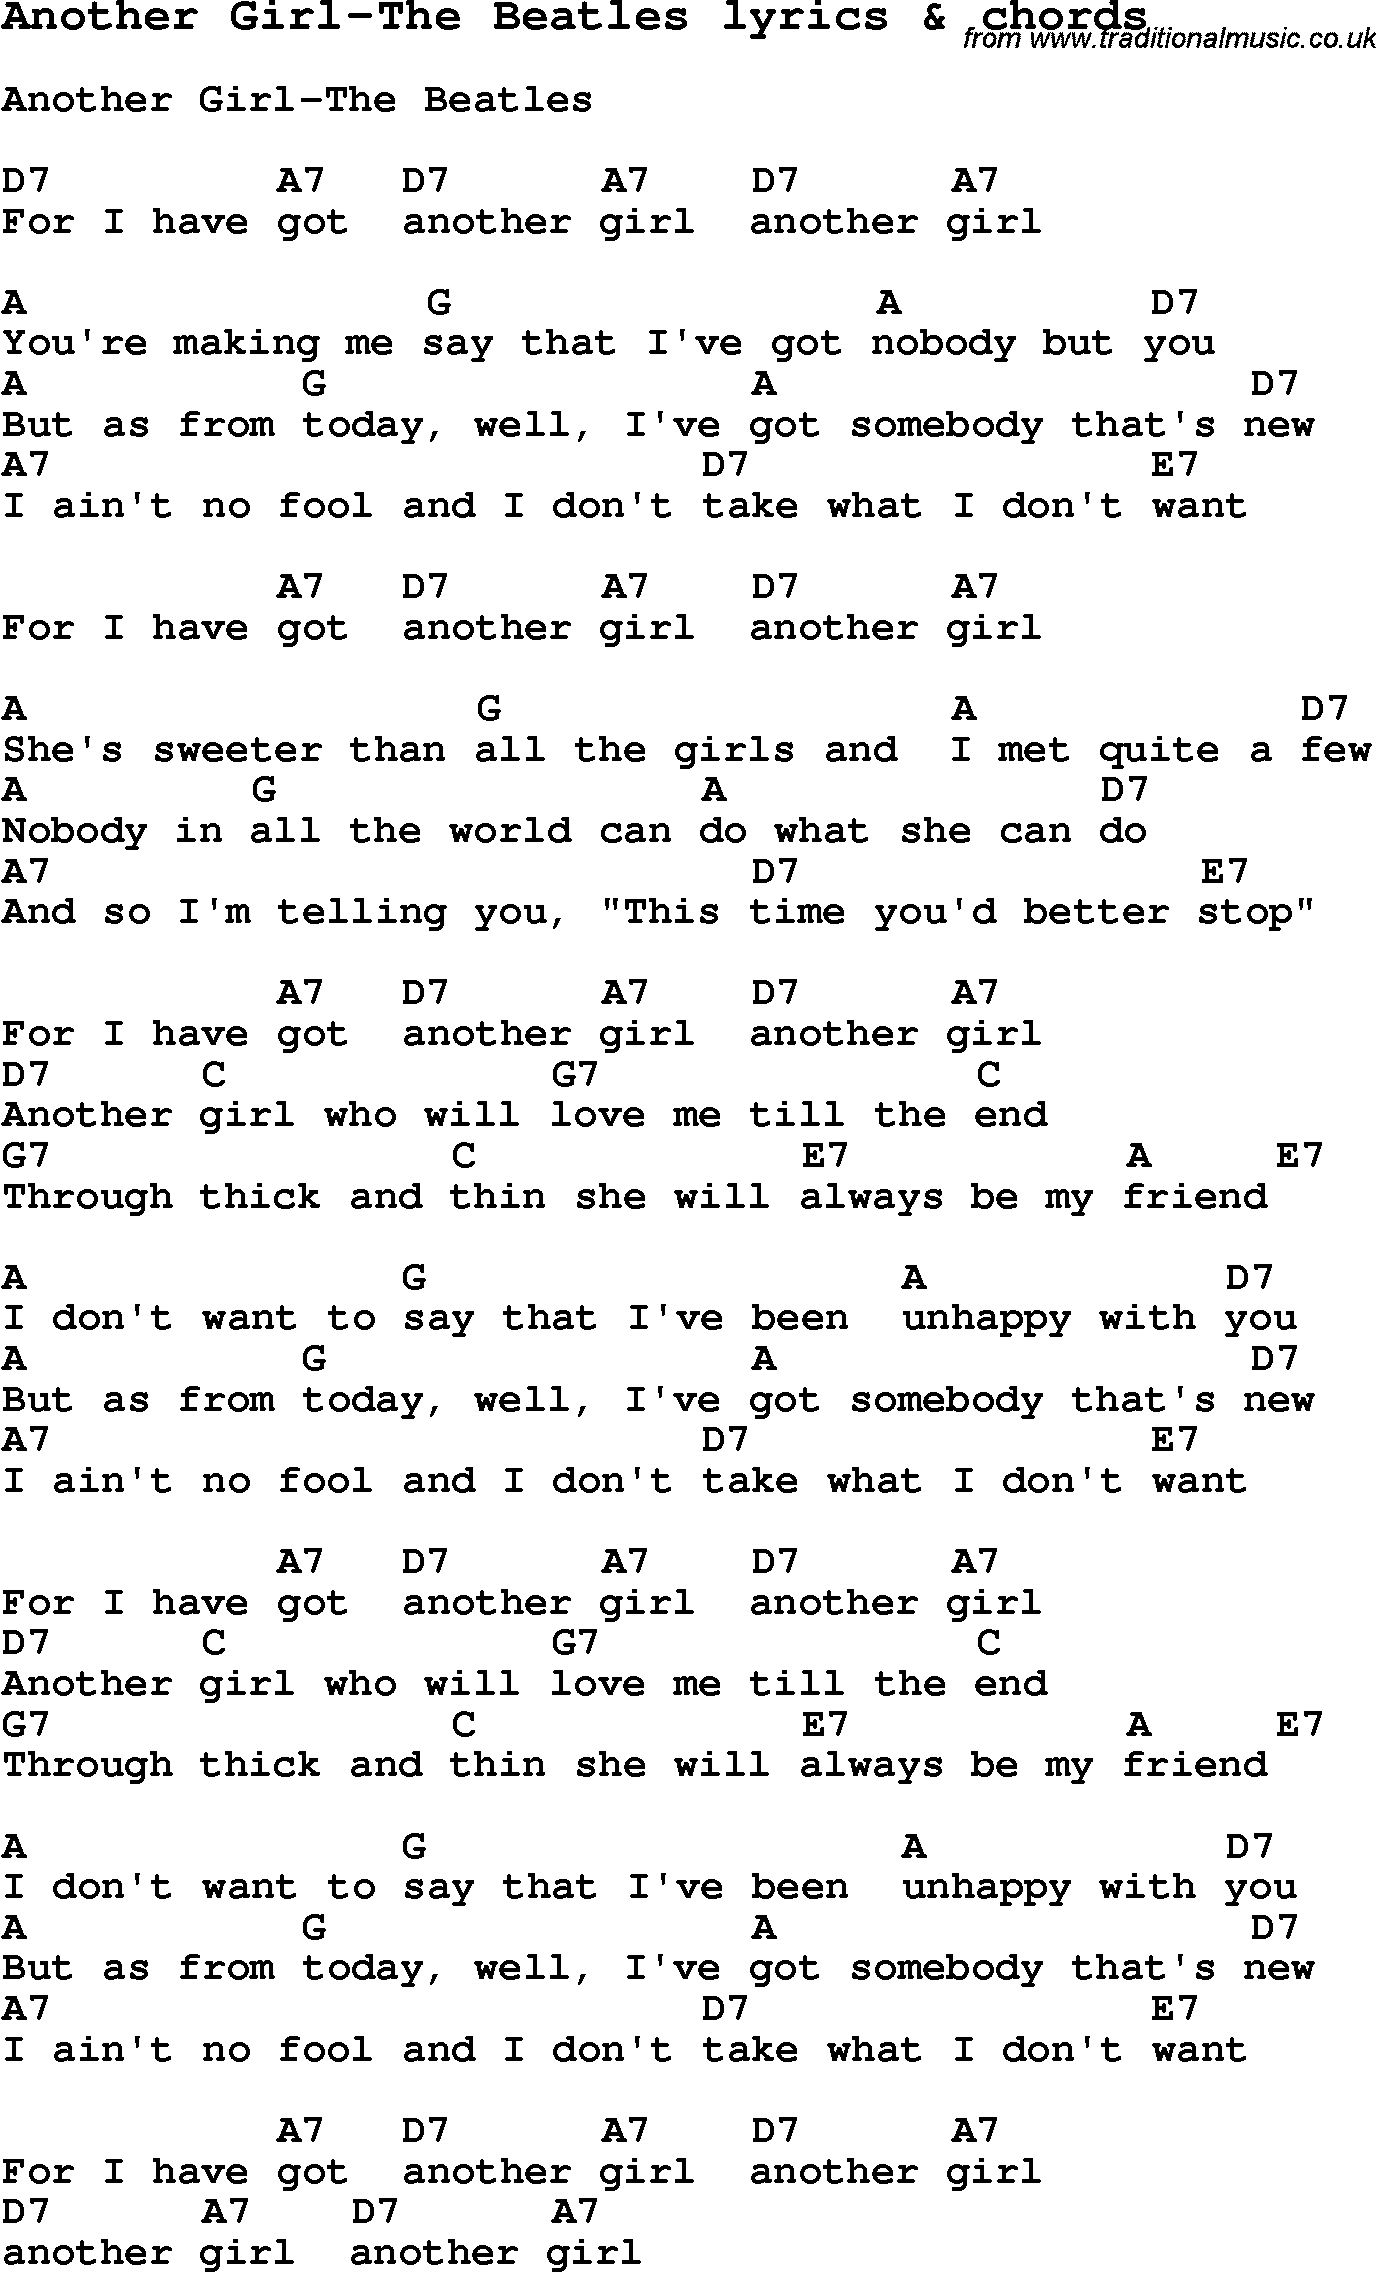 Love Song Lyrics for: Another Girl-The Beatles with chords for Ukulele, Guitar Banjo etc.